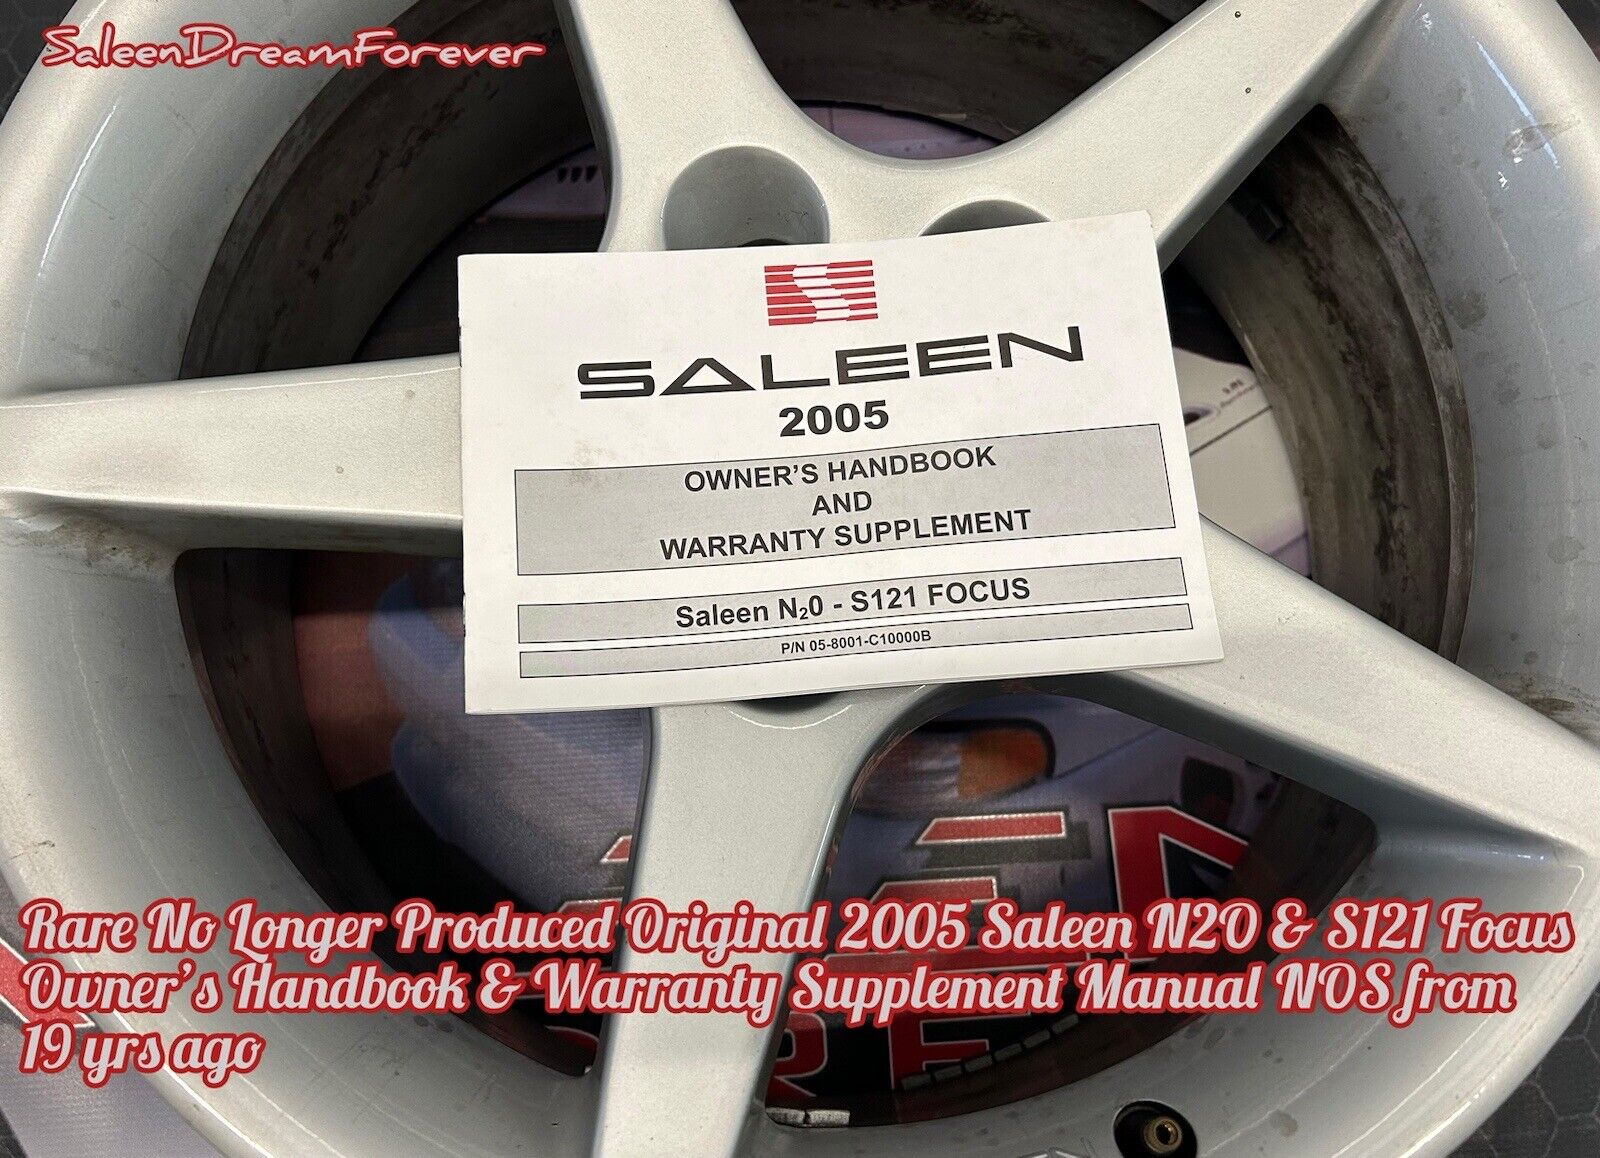 2005 SALEEN N2O & S121 FOCUS OWNERS MANUAL BROCHURE NOS FORD GT SVT COBRA SHELBY